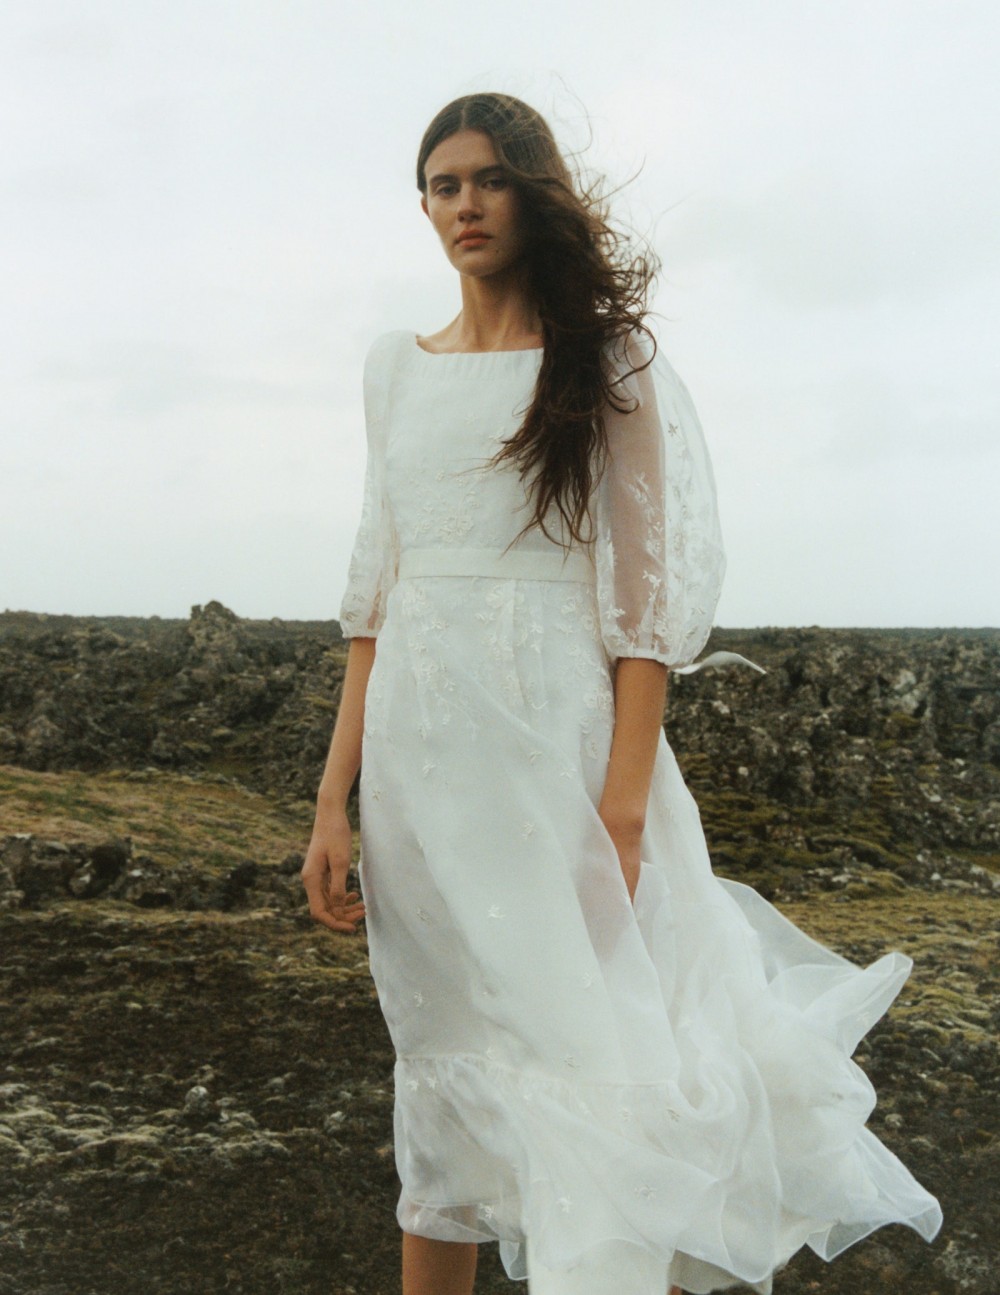 Erdem Launches His First Bridal Collection